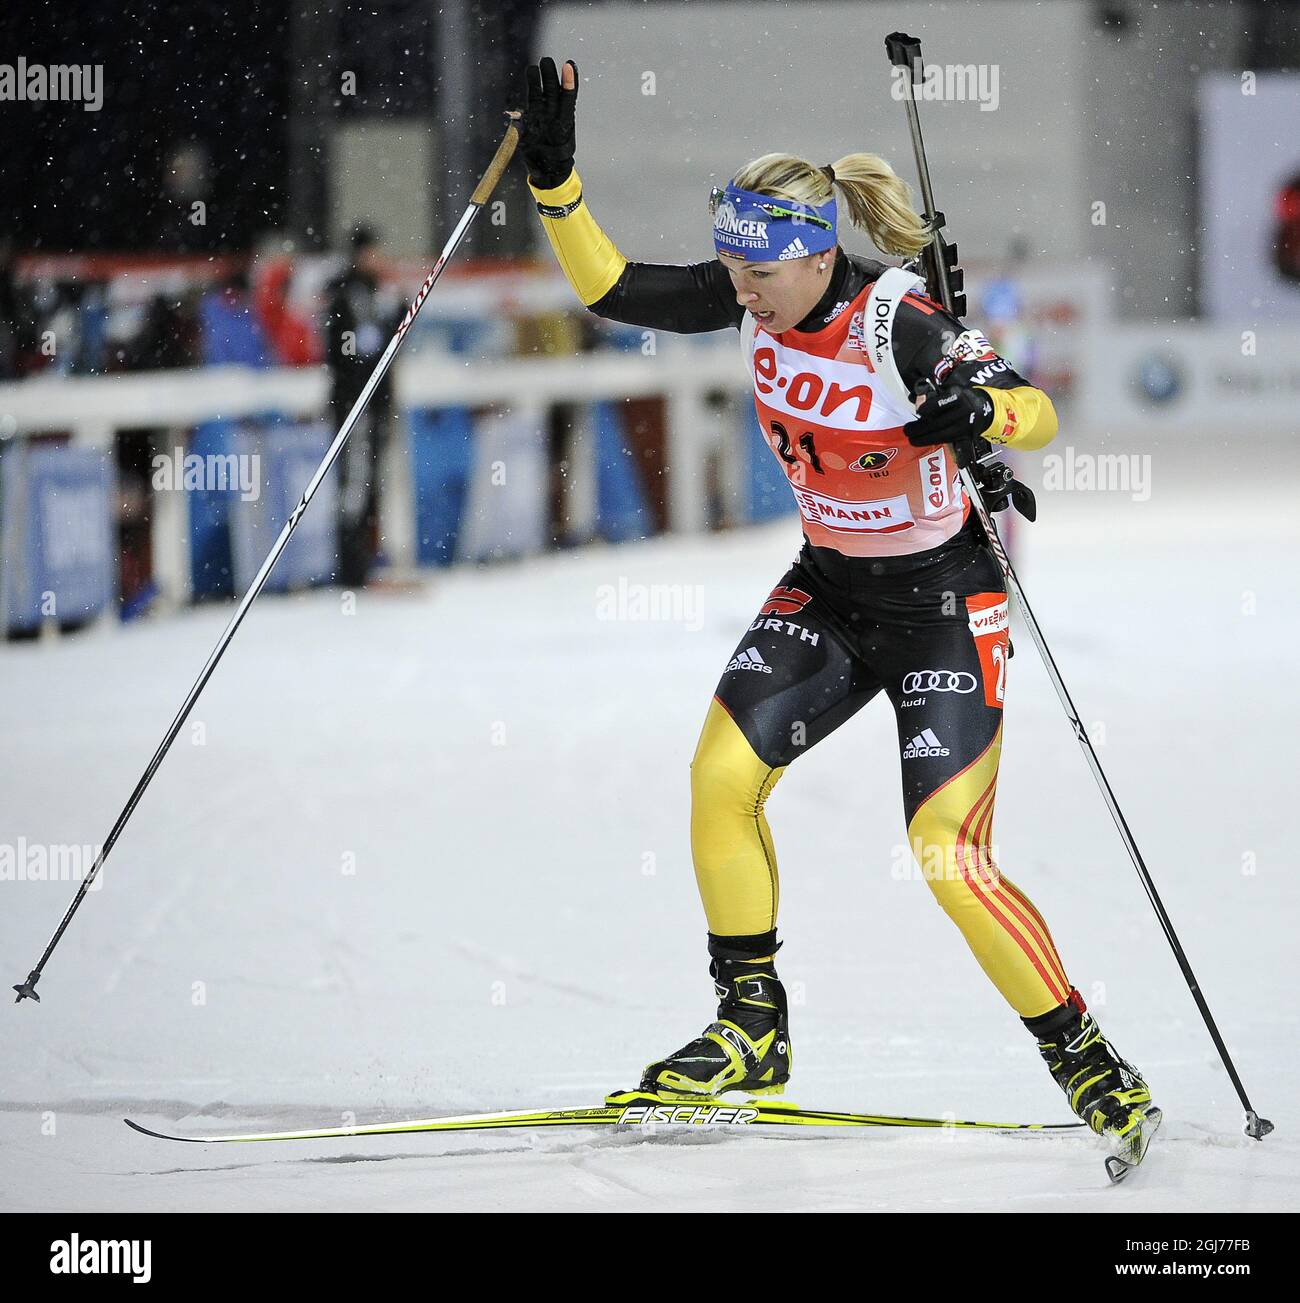 OSTERSUND 2011-12-02 Germany's Magdalena Neuner won the women's 7.5 km  Sprint competition of the Biathlon World Cup in Oestersund, Sweden,  December 3, 2011. Photo: Anders Wiklund / SCANPIX ** SWEDEN OUT ** Stock  Photo - Alamy